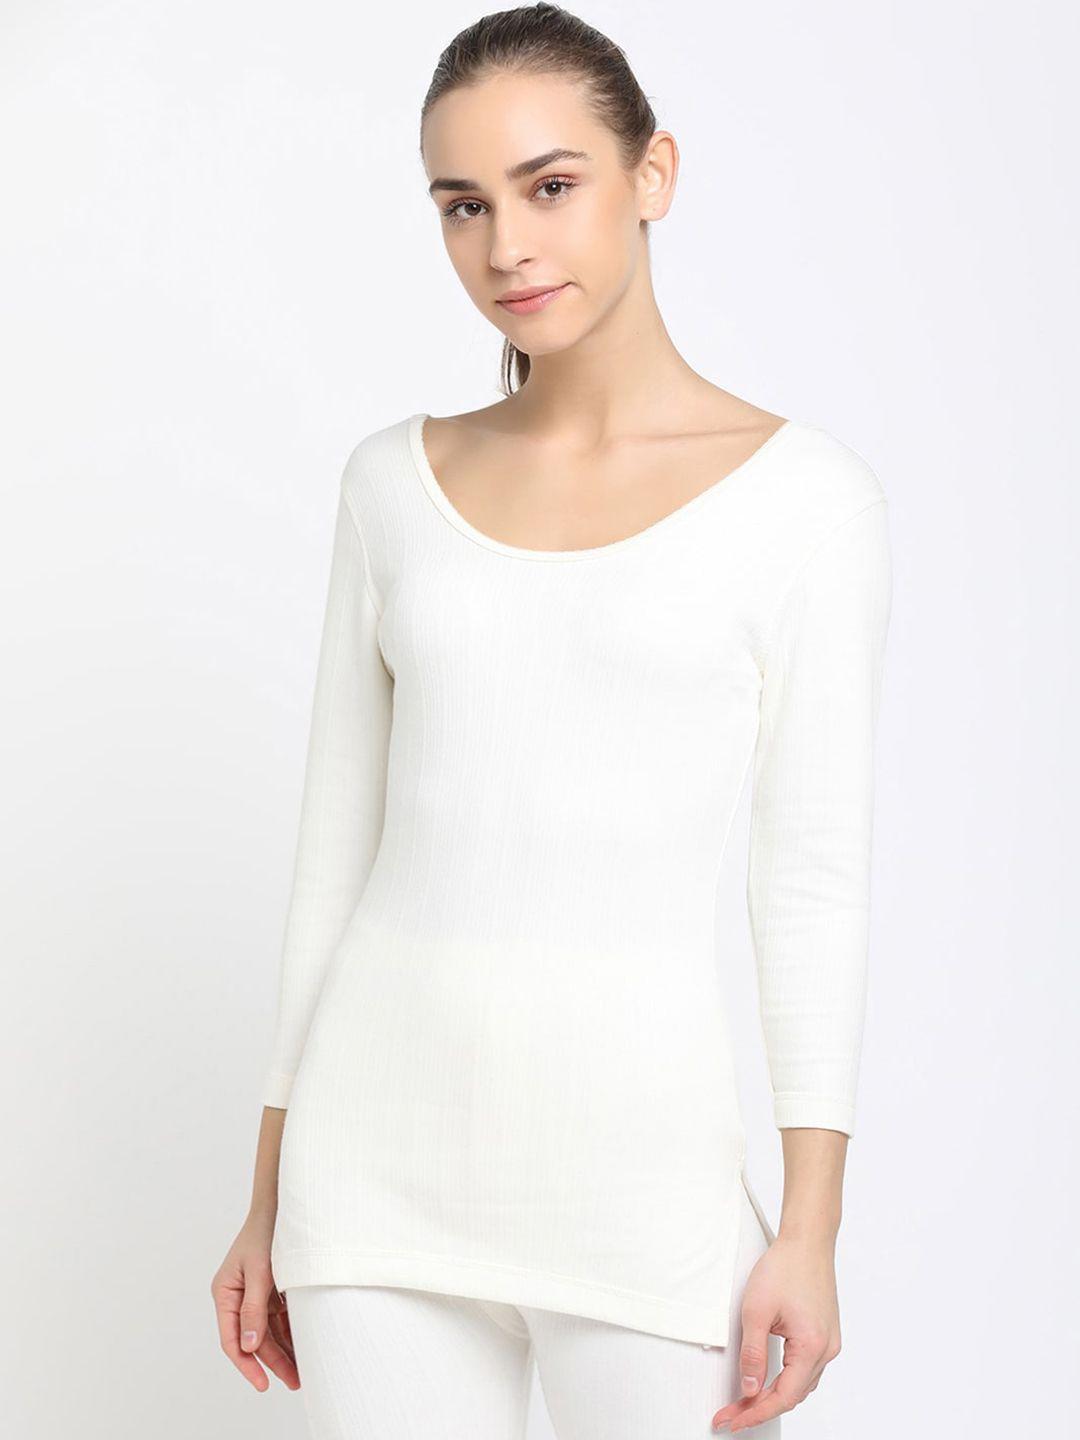 dixcy scott slimz women off white solid thermal top